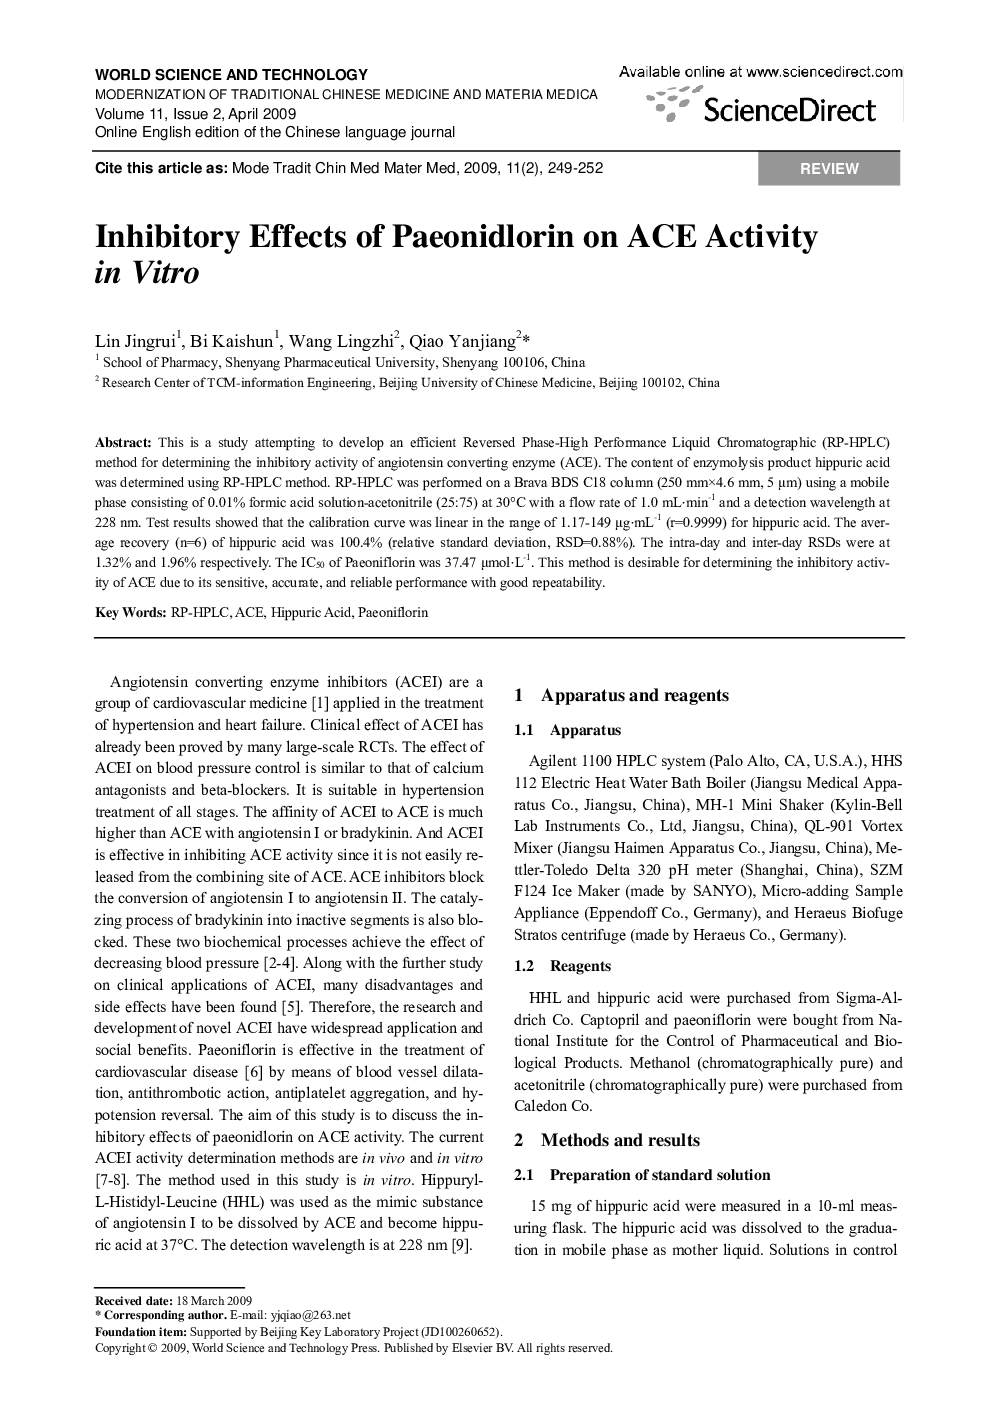 Inhibitory Effects of Paeonidlorin on ACE Activity in Vitro 